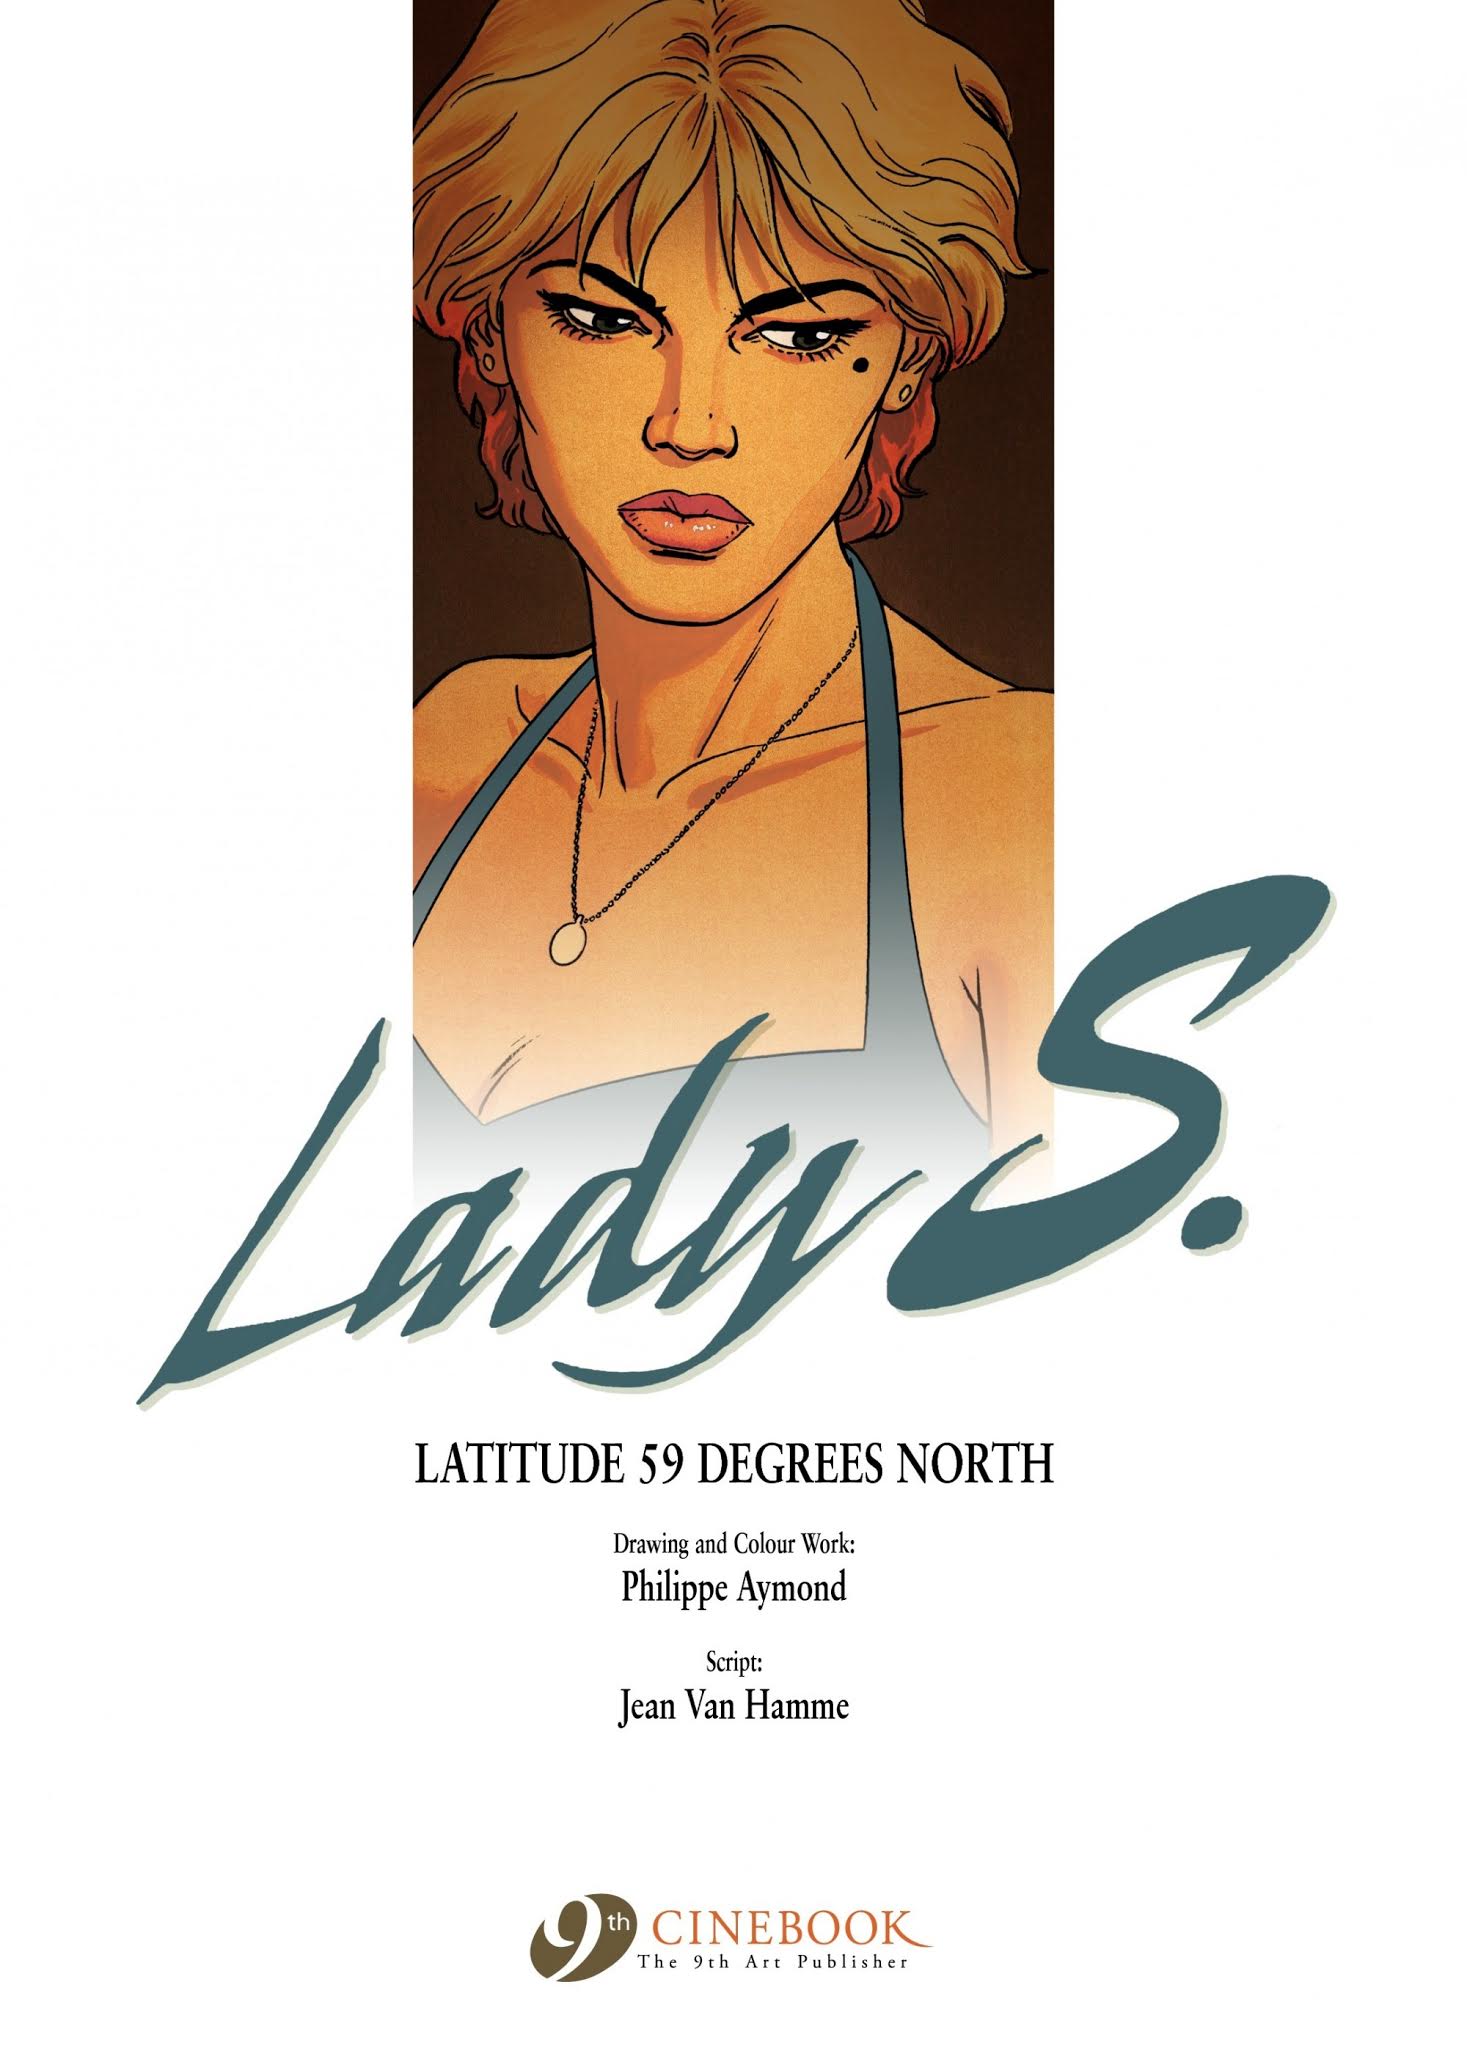 Read online Lady S. comic -  Issue # TPB 2 - 2